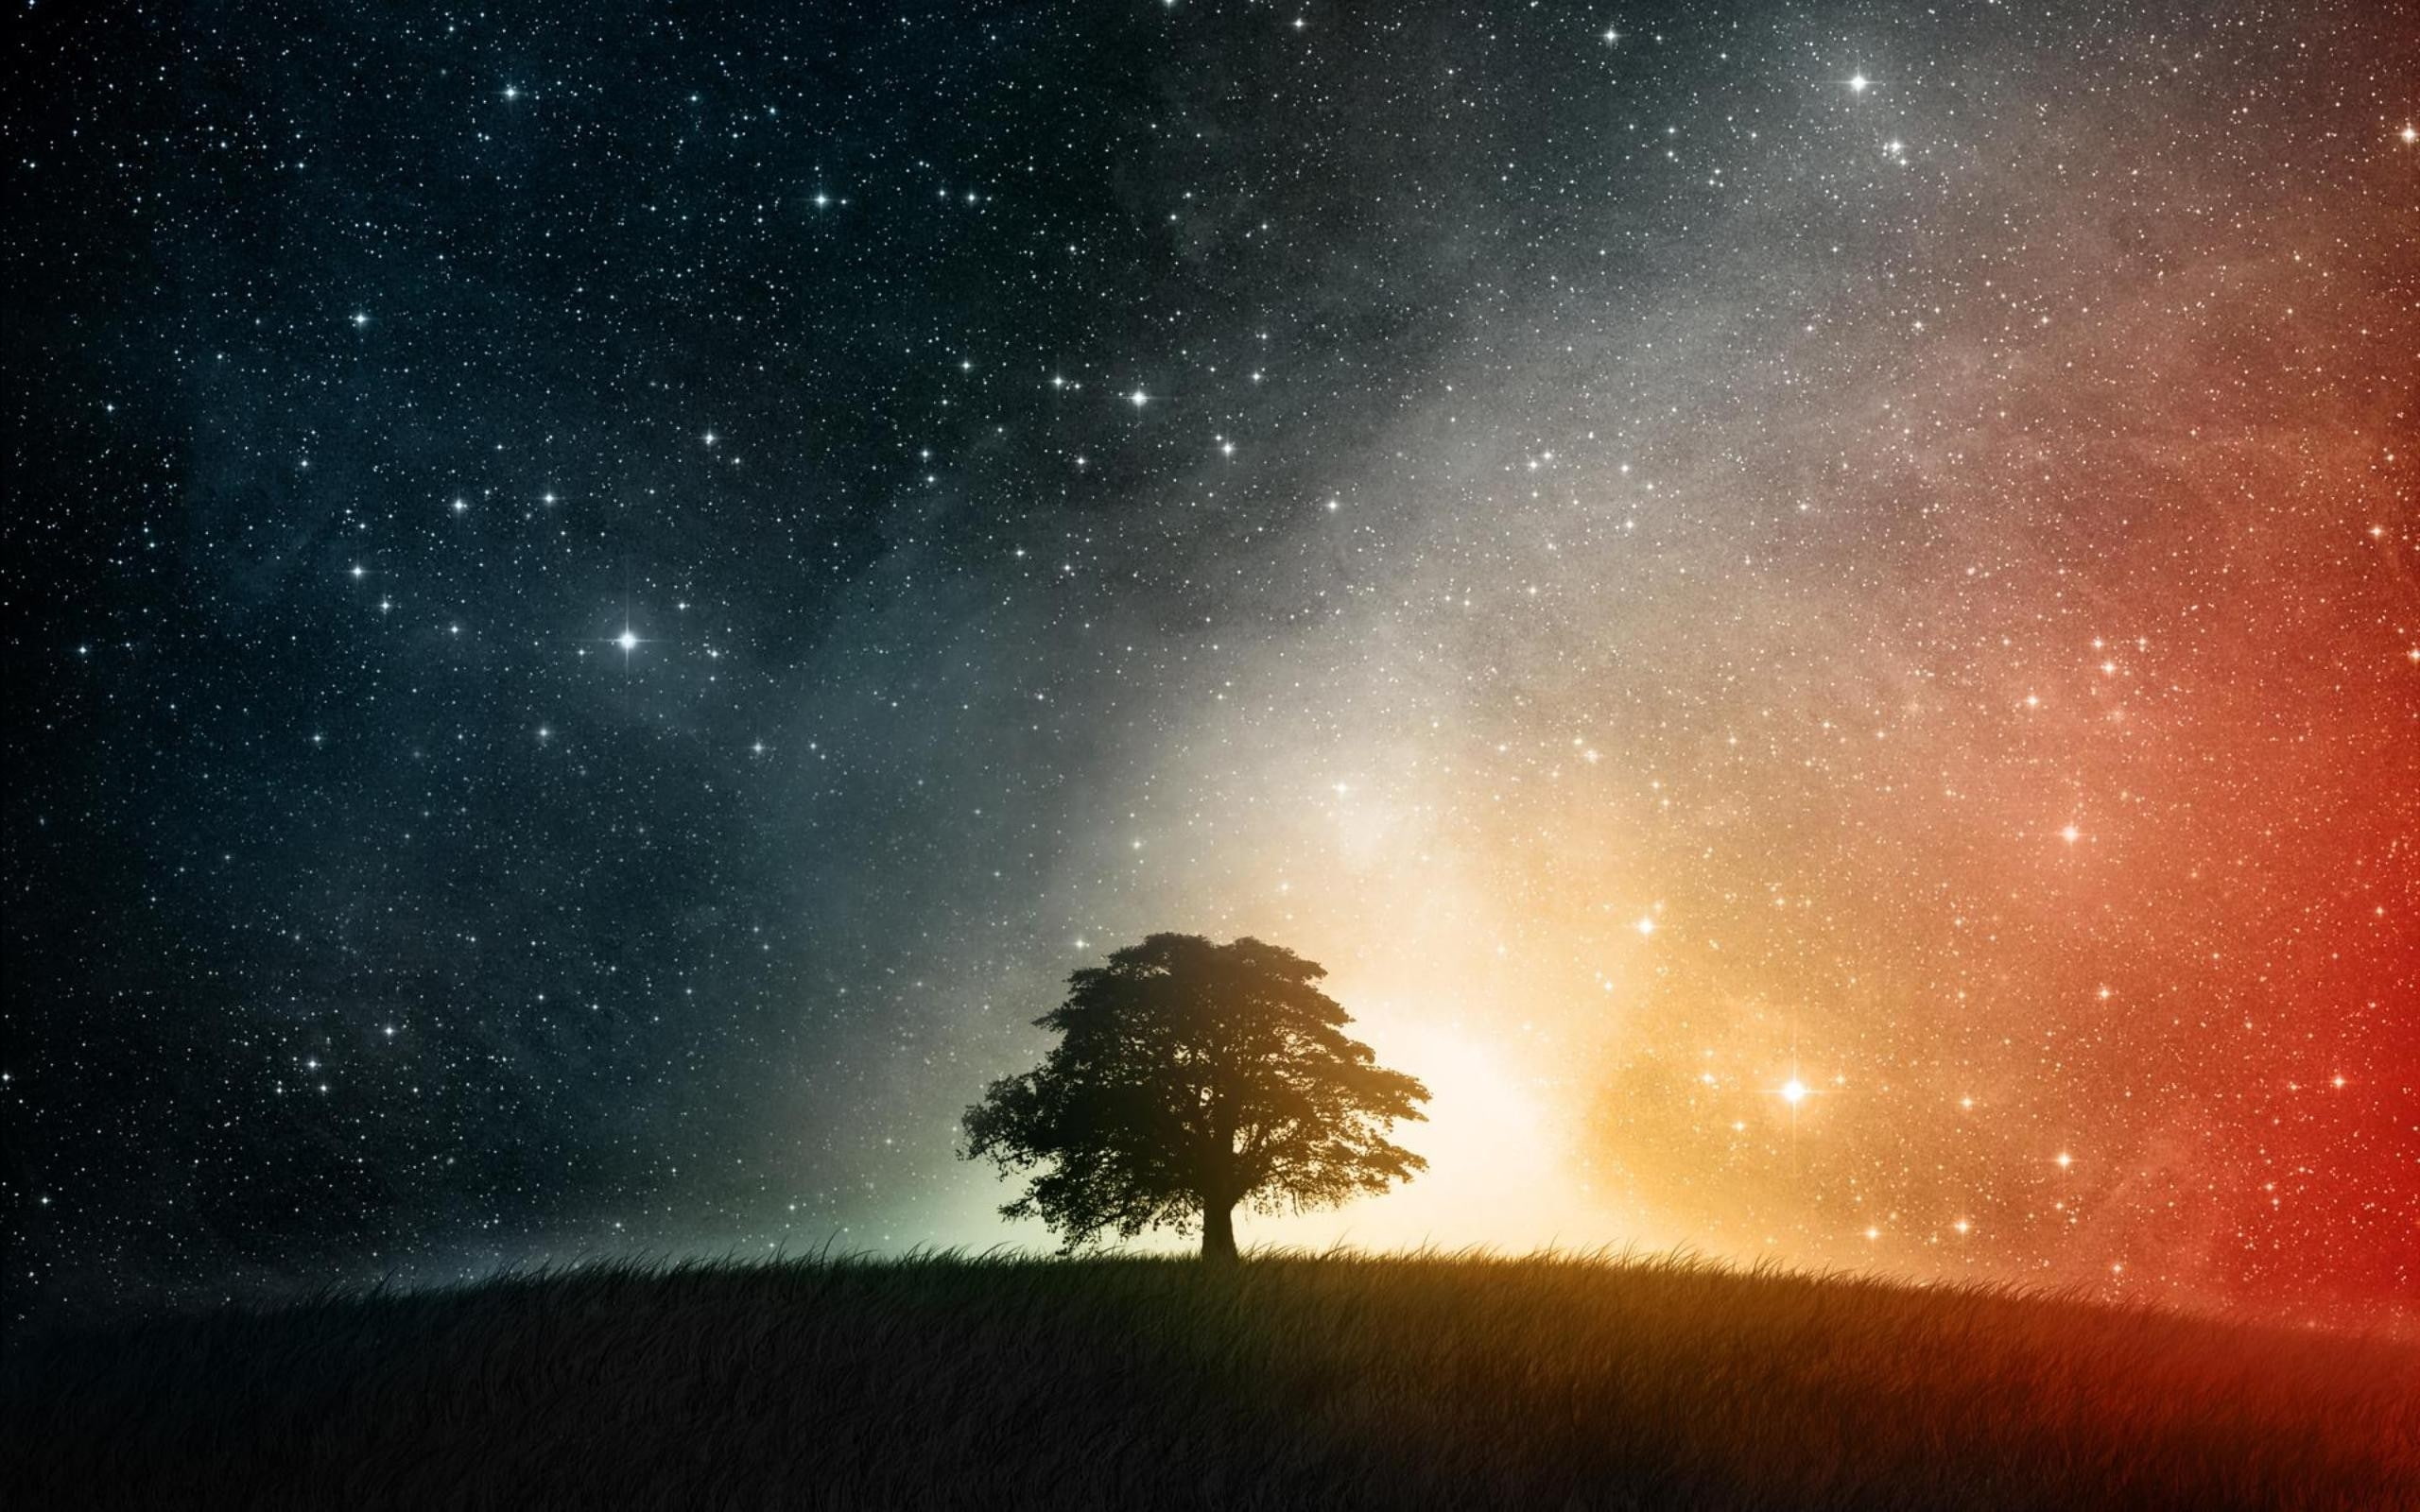 outer space trees night colorful stars fantasy art creative artwork photomanipulations 2560x1600 Abstract Fantasy HD Art